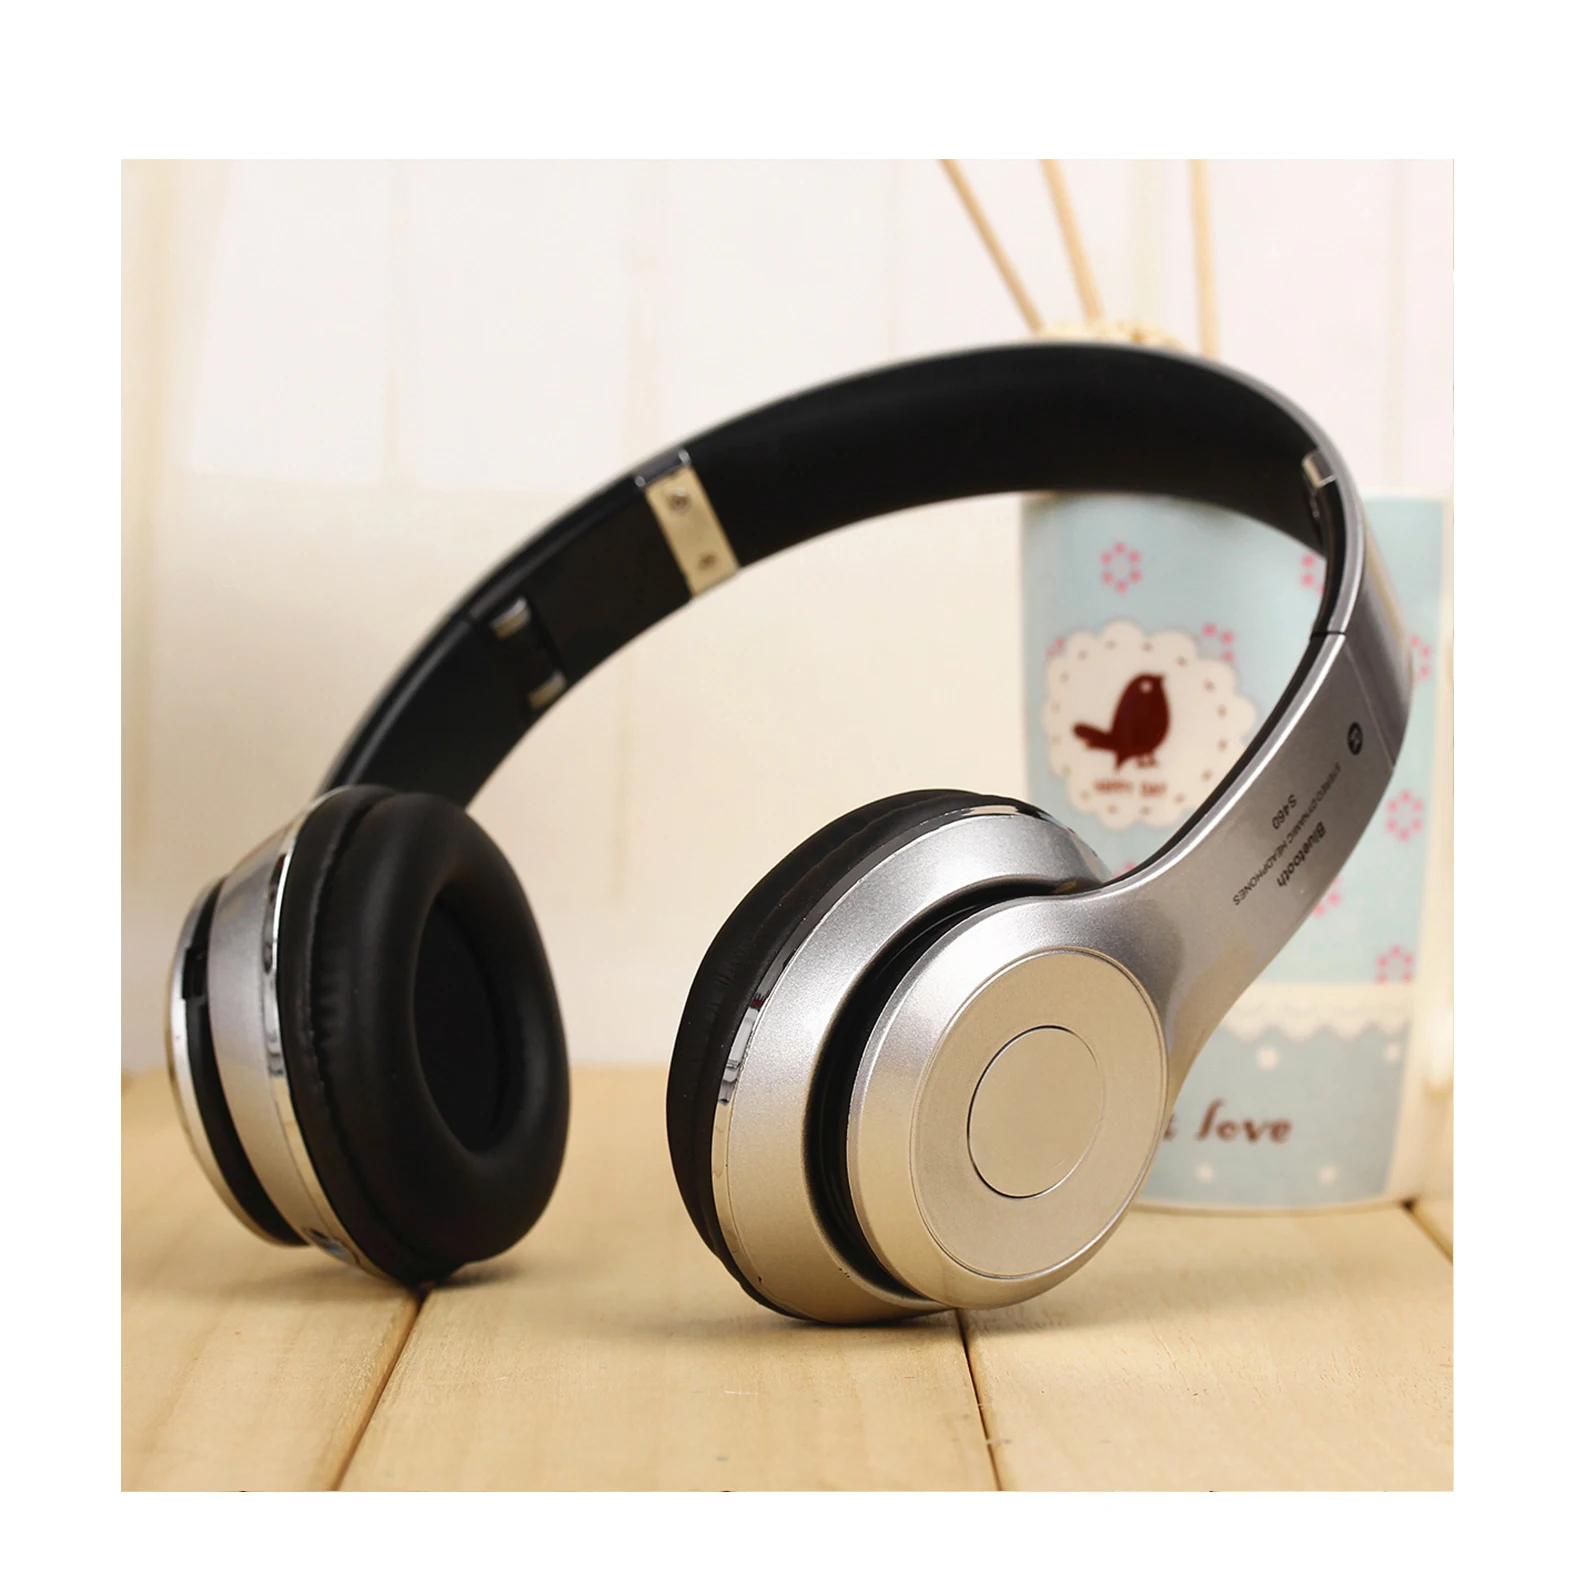 

FB-S460 ANC noise cancelling video songs consumer electronics gamming headset earphone earbuds wireless headphones